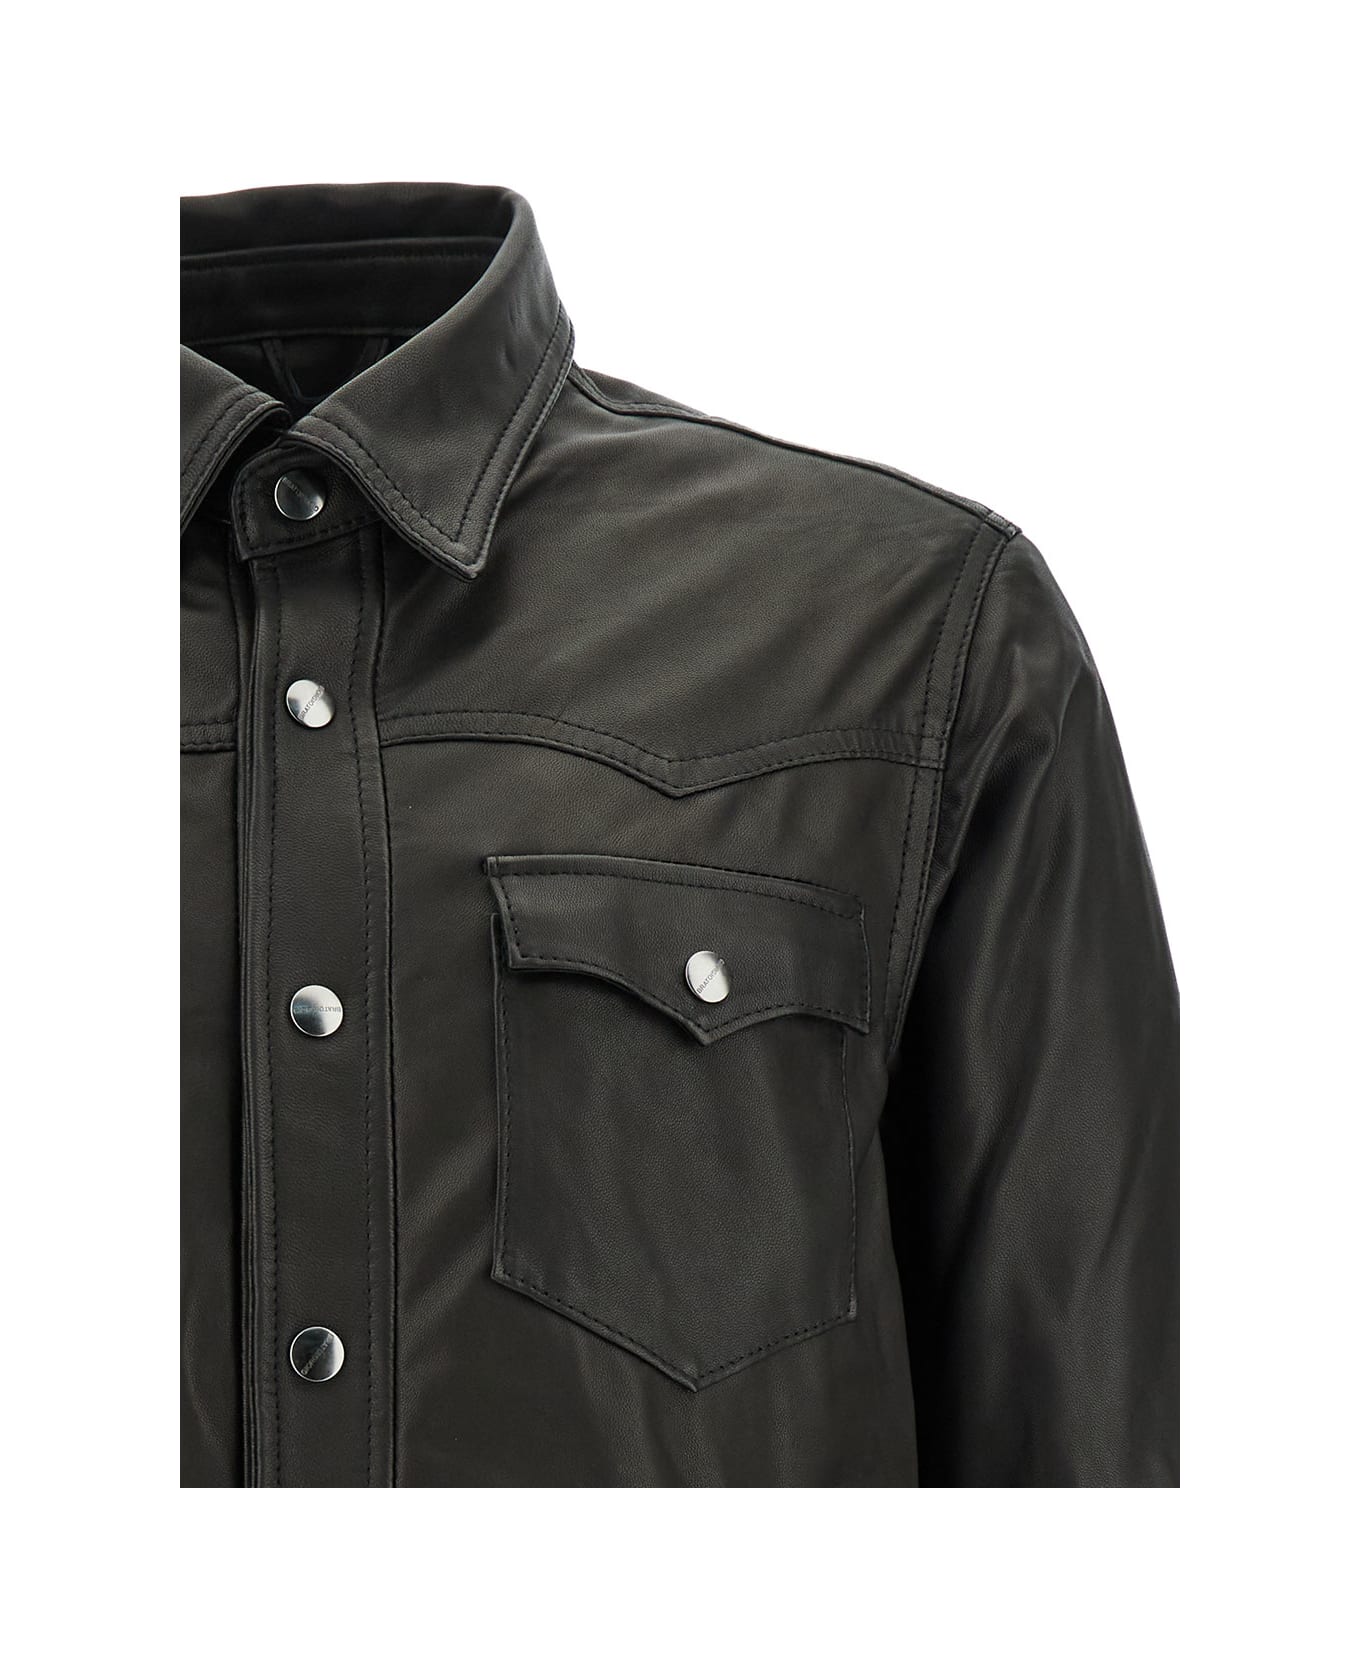 Giorgio Brato Black Western Jacket With Long Sleeve In Smooth Leather Man - Black